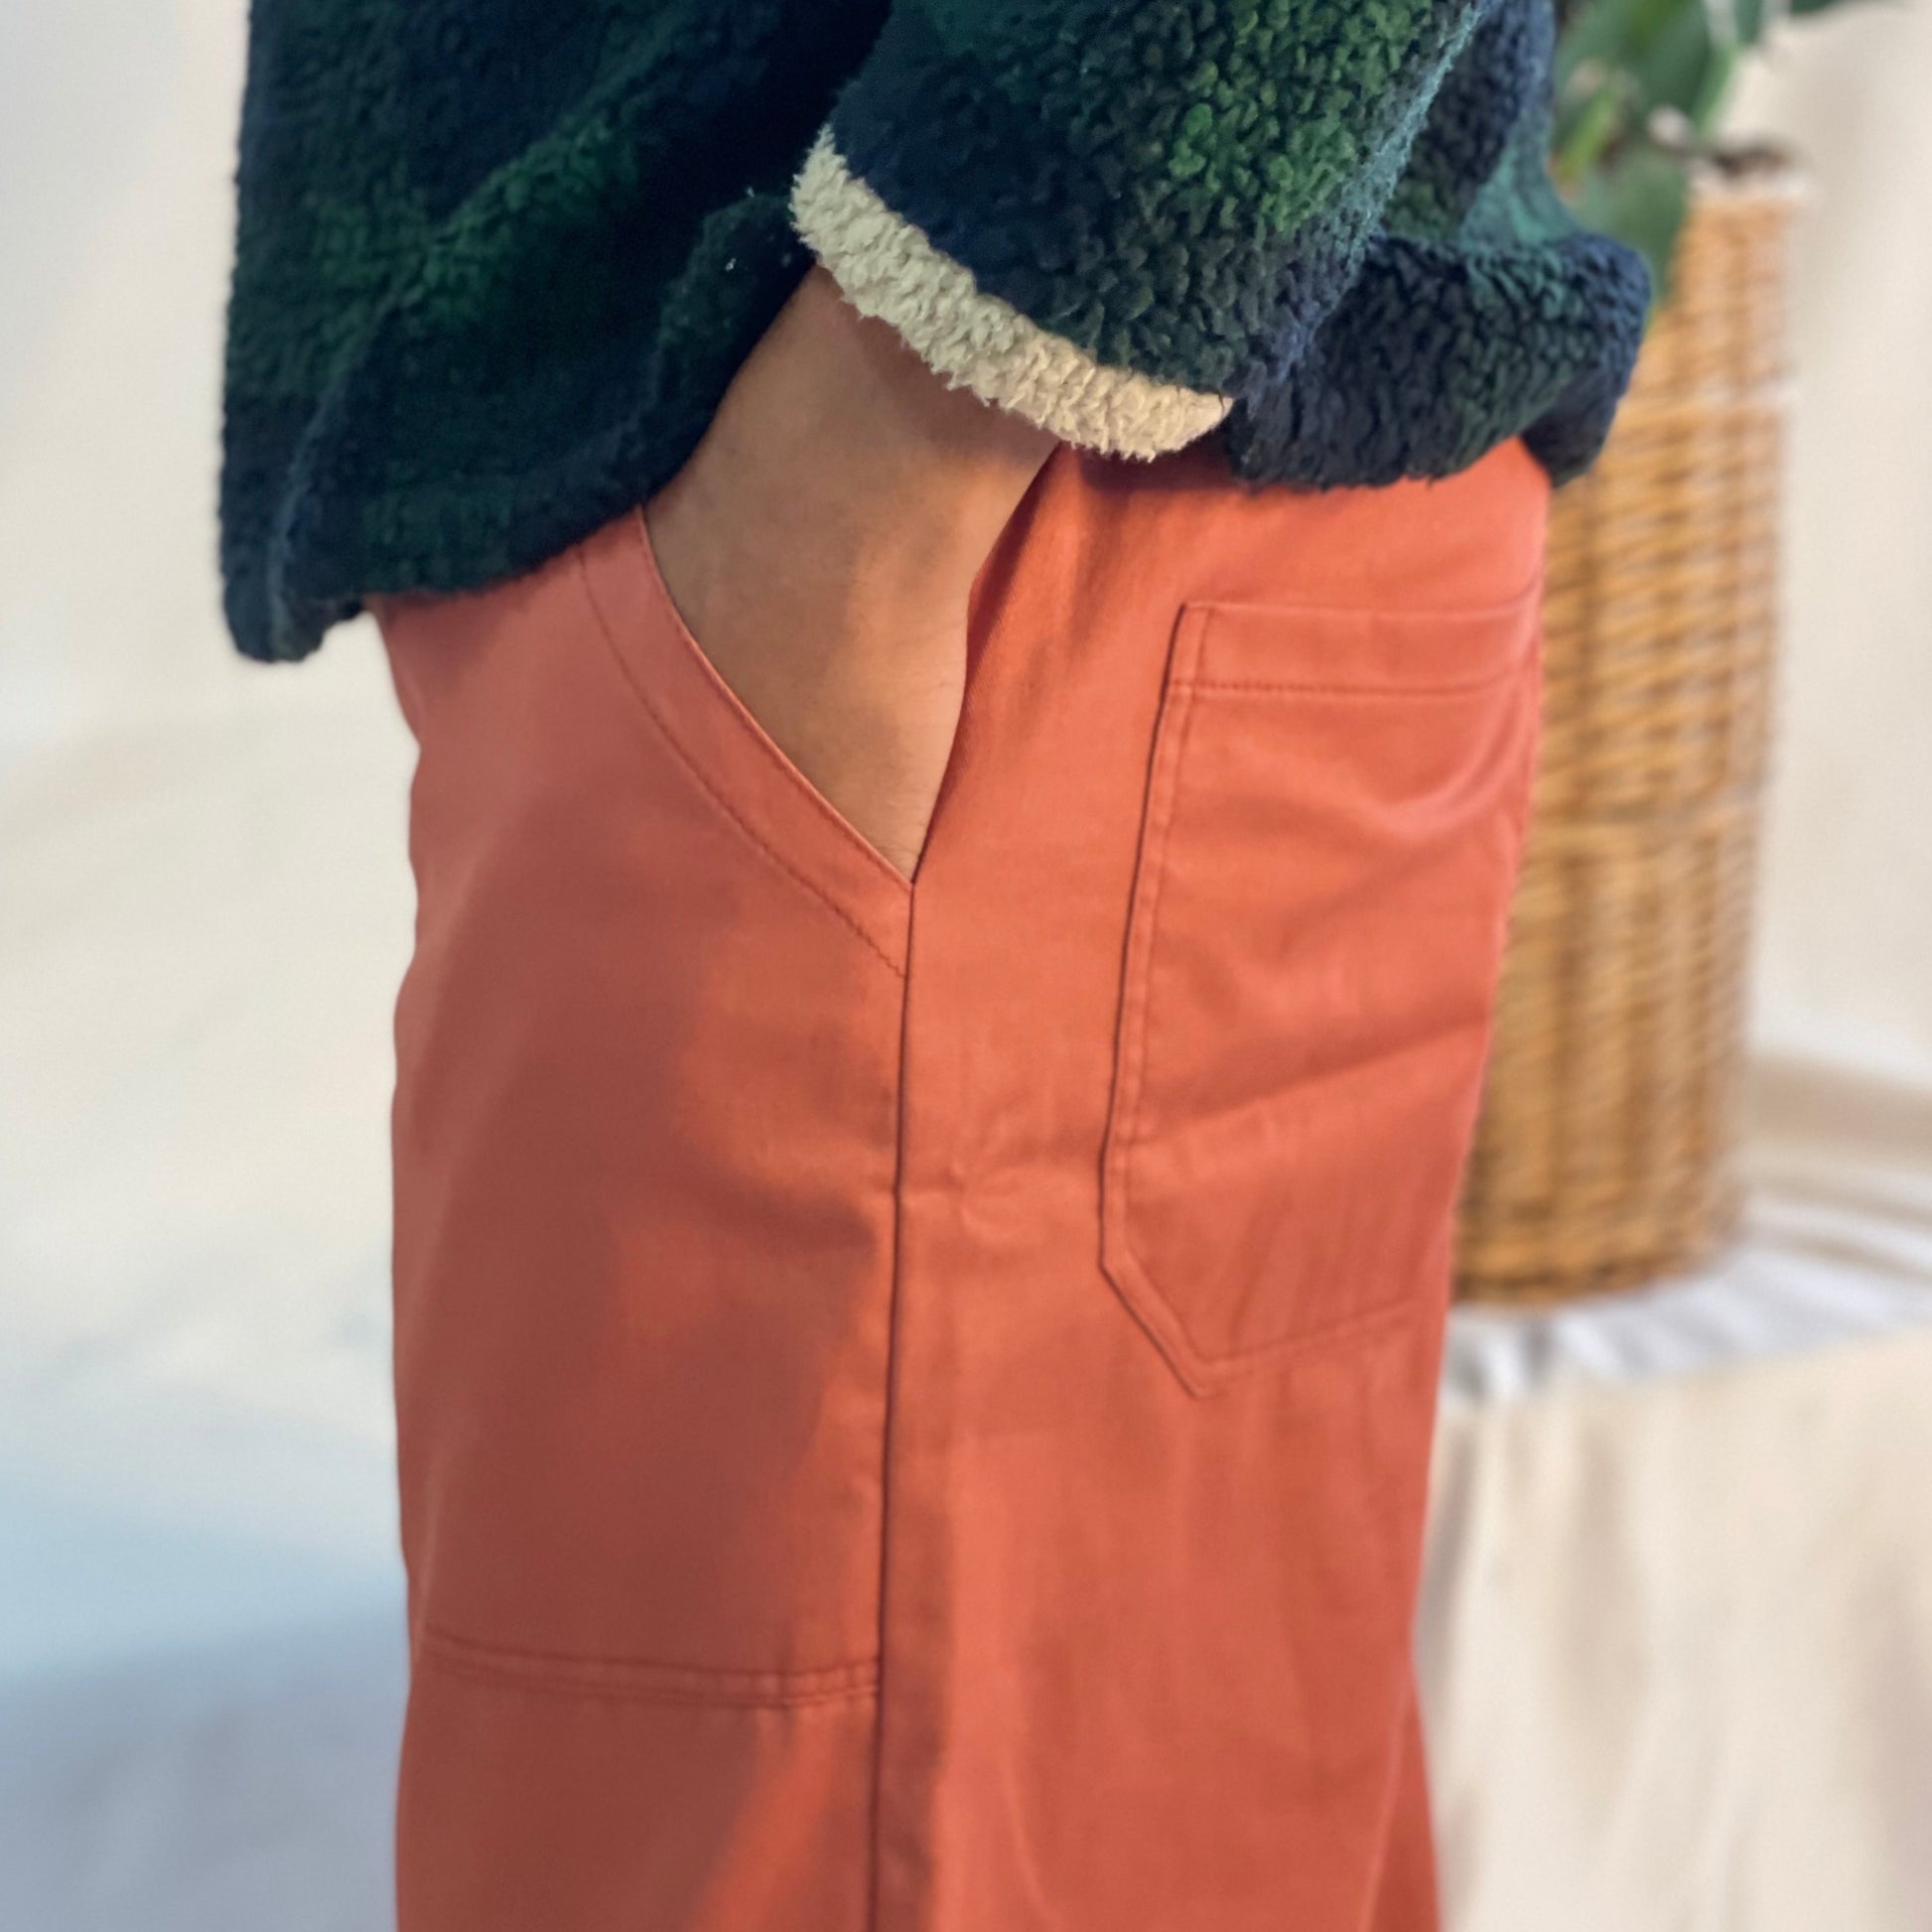 Model wearing rust coloured pants with a wool plaid jersey against a white backdrop.